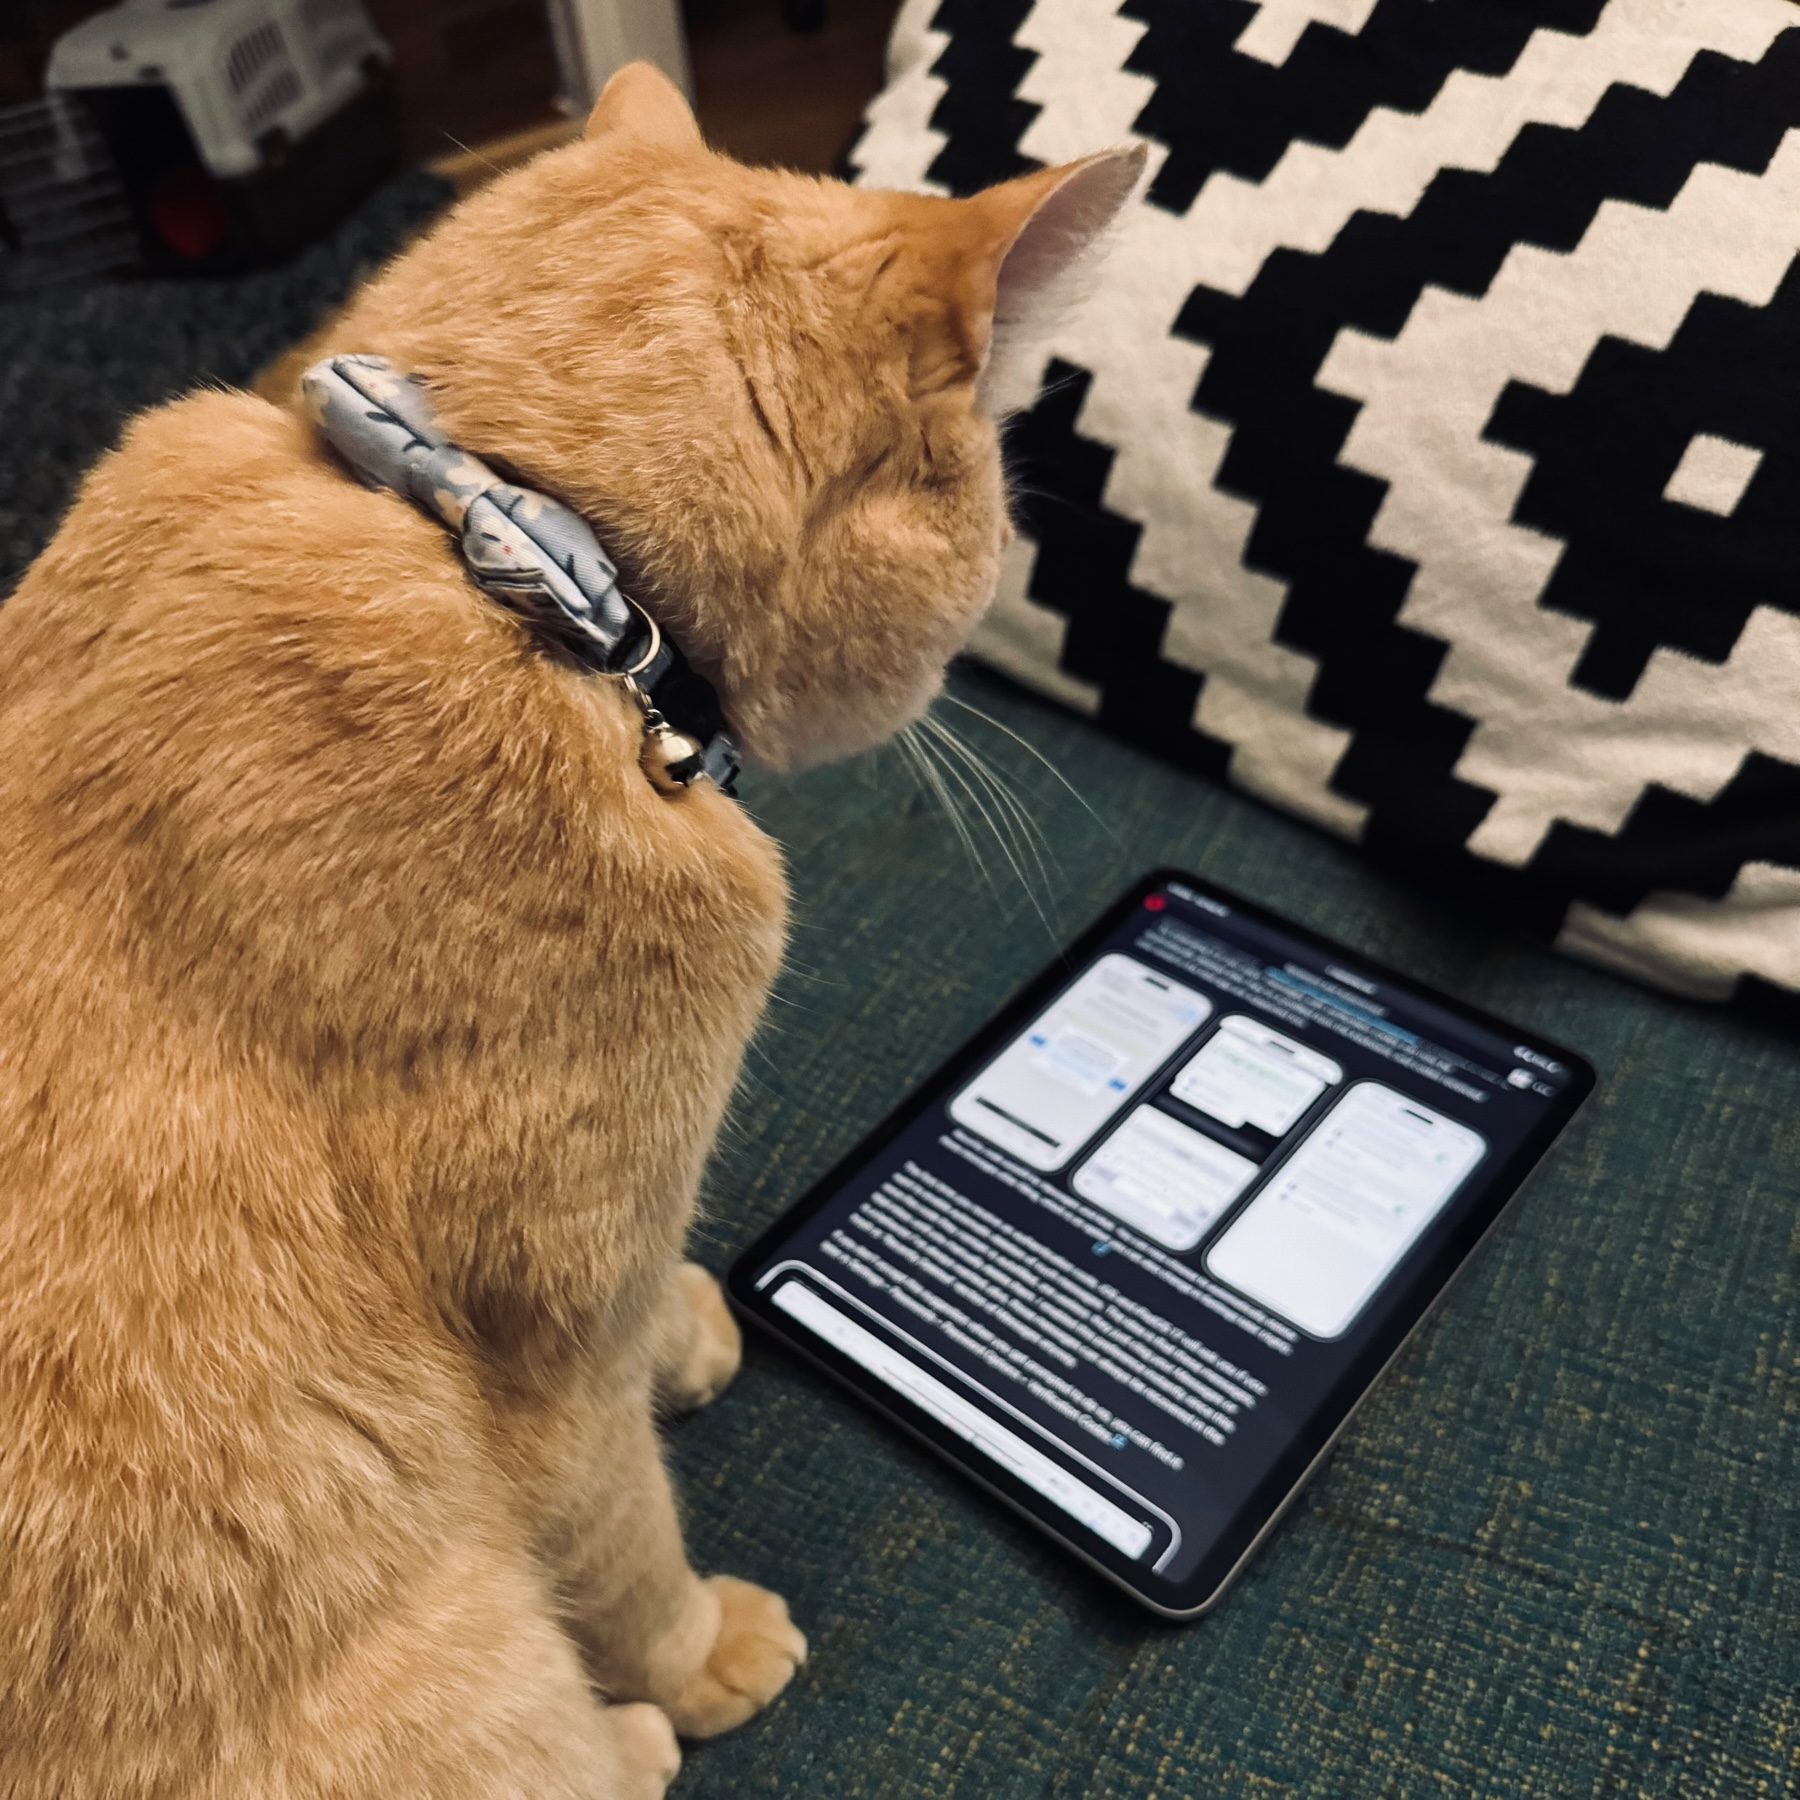 A cat looks at an iPad with an article on it.